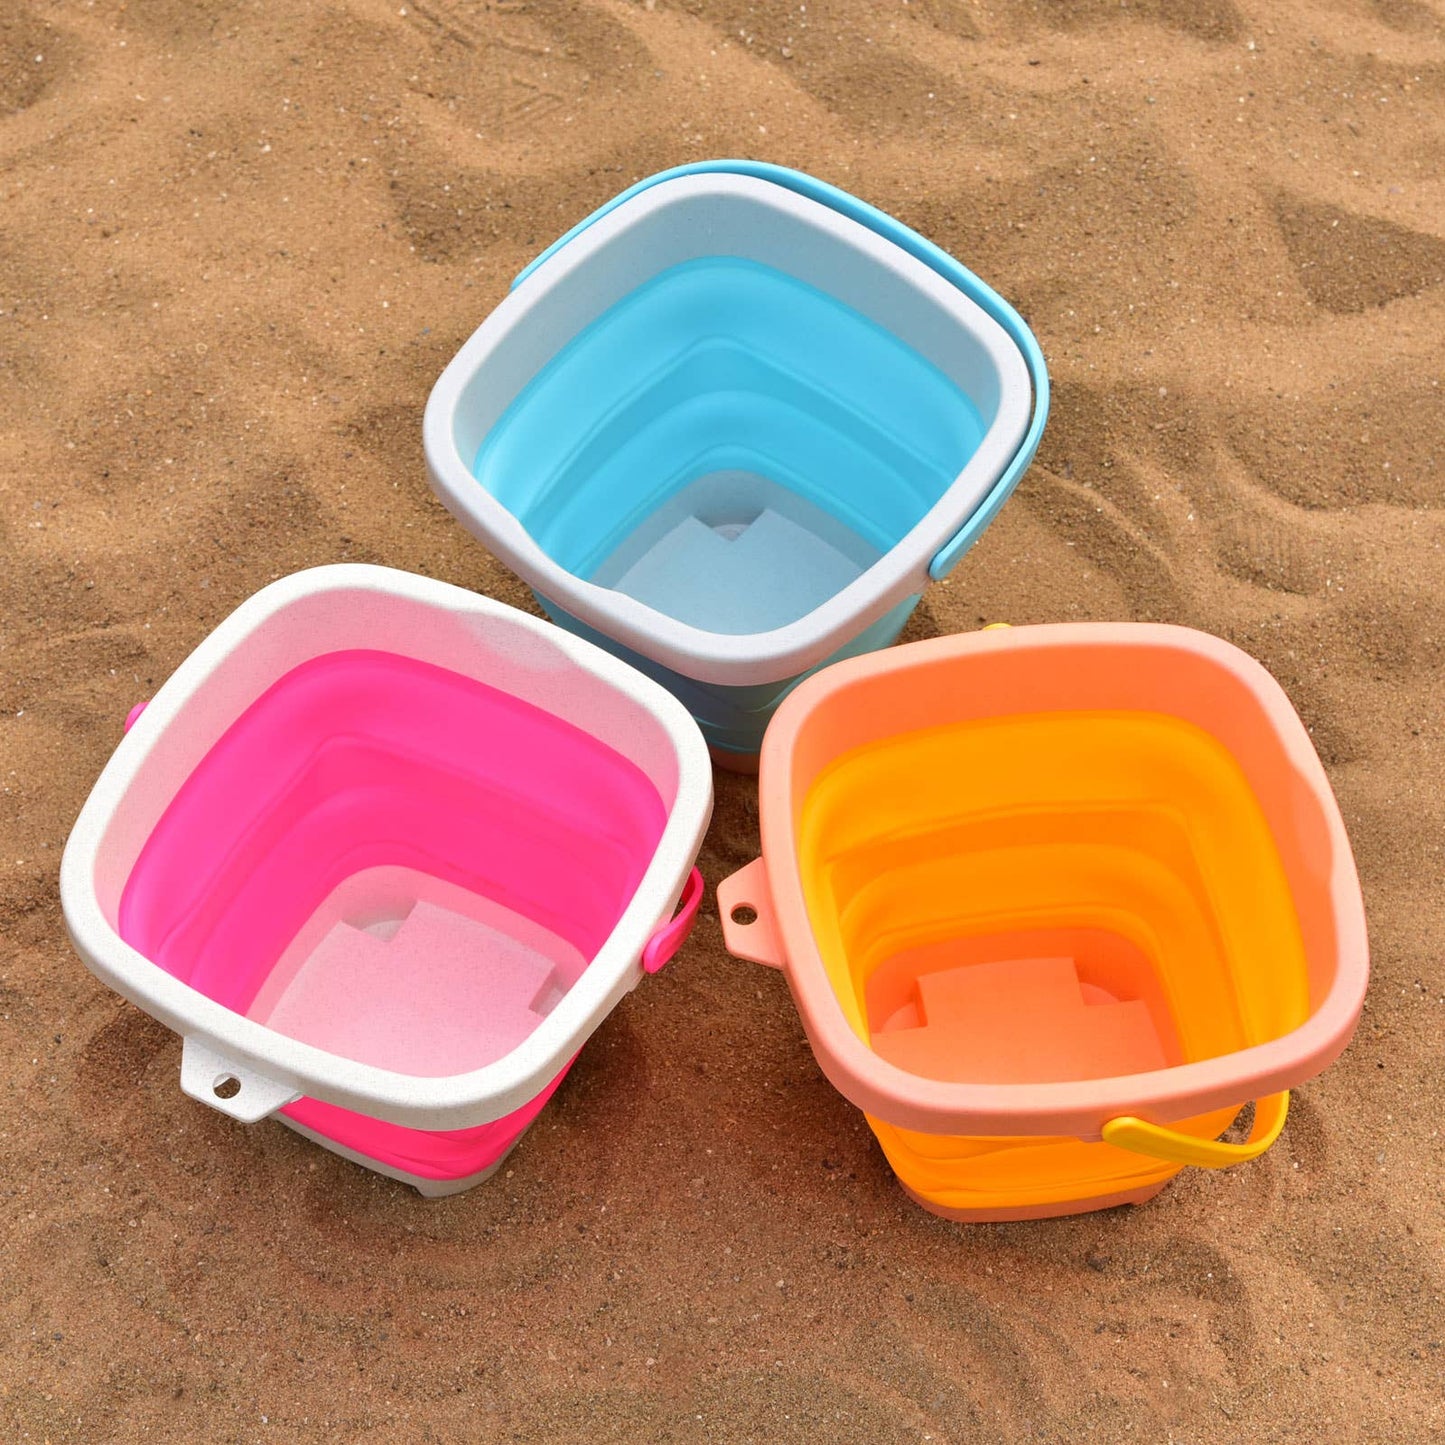 3 PCs Collapsible Sand Buckets with Handle Foldable Baskets